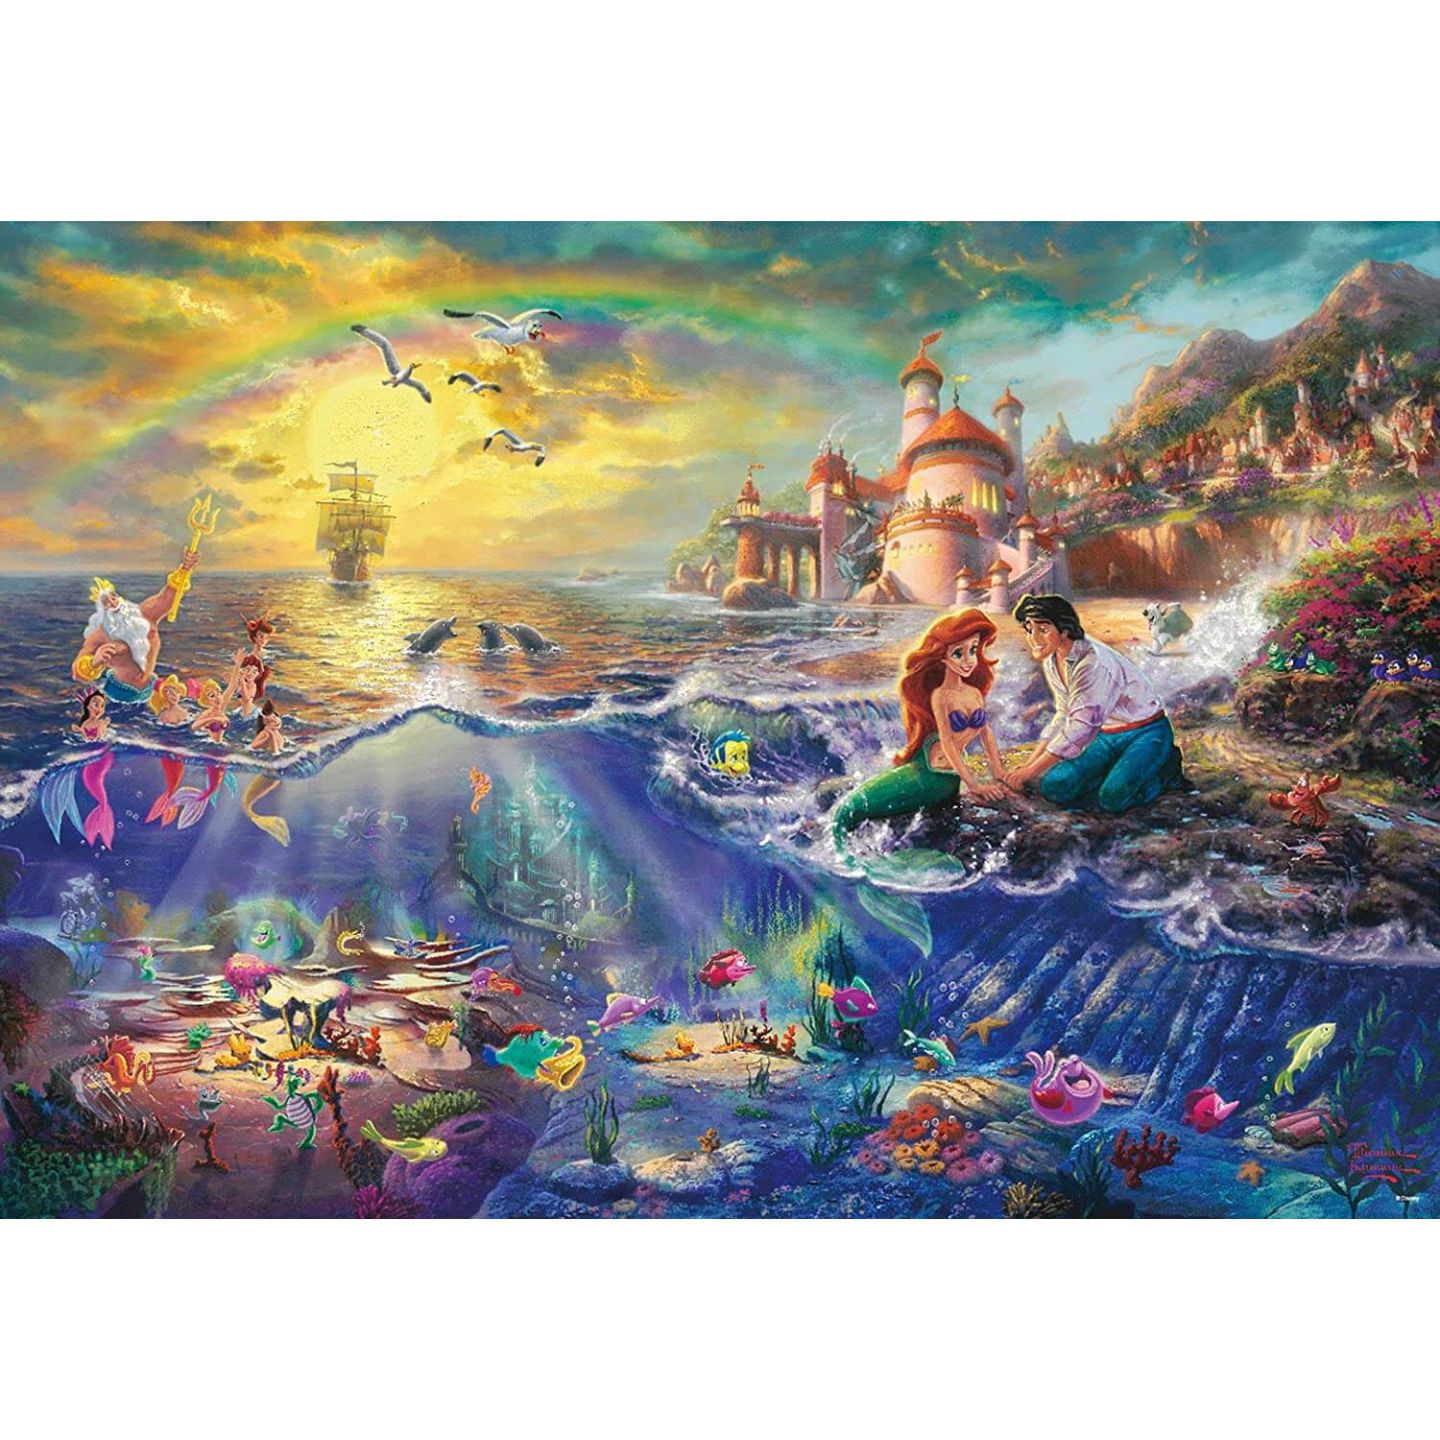 1000 Piece Jigsaw Puzzle Beauty and the Beast Falling in Love 51 x 73.5 cm *